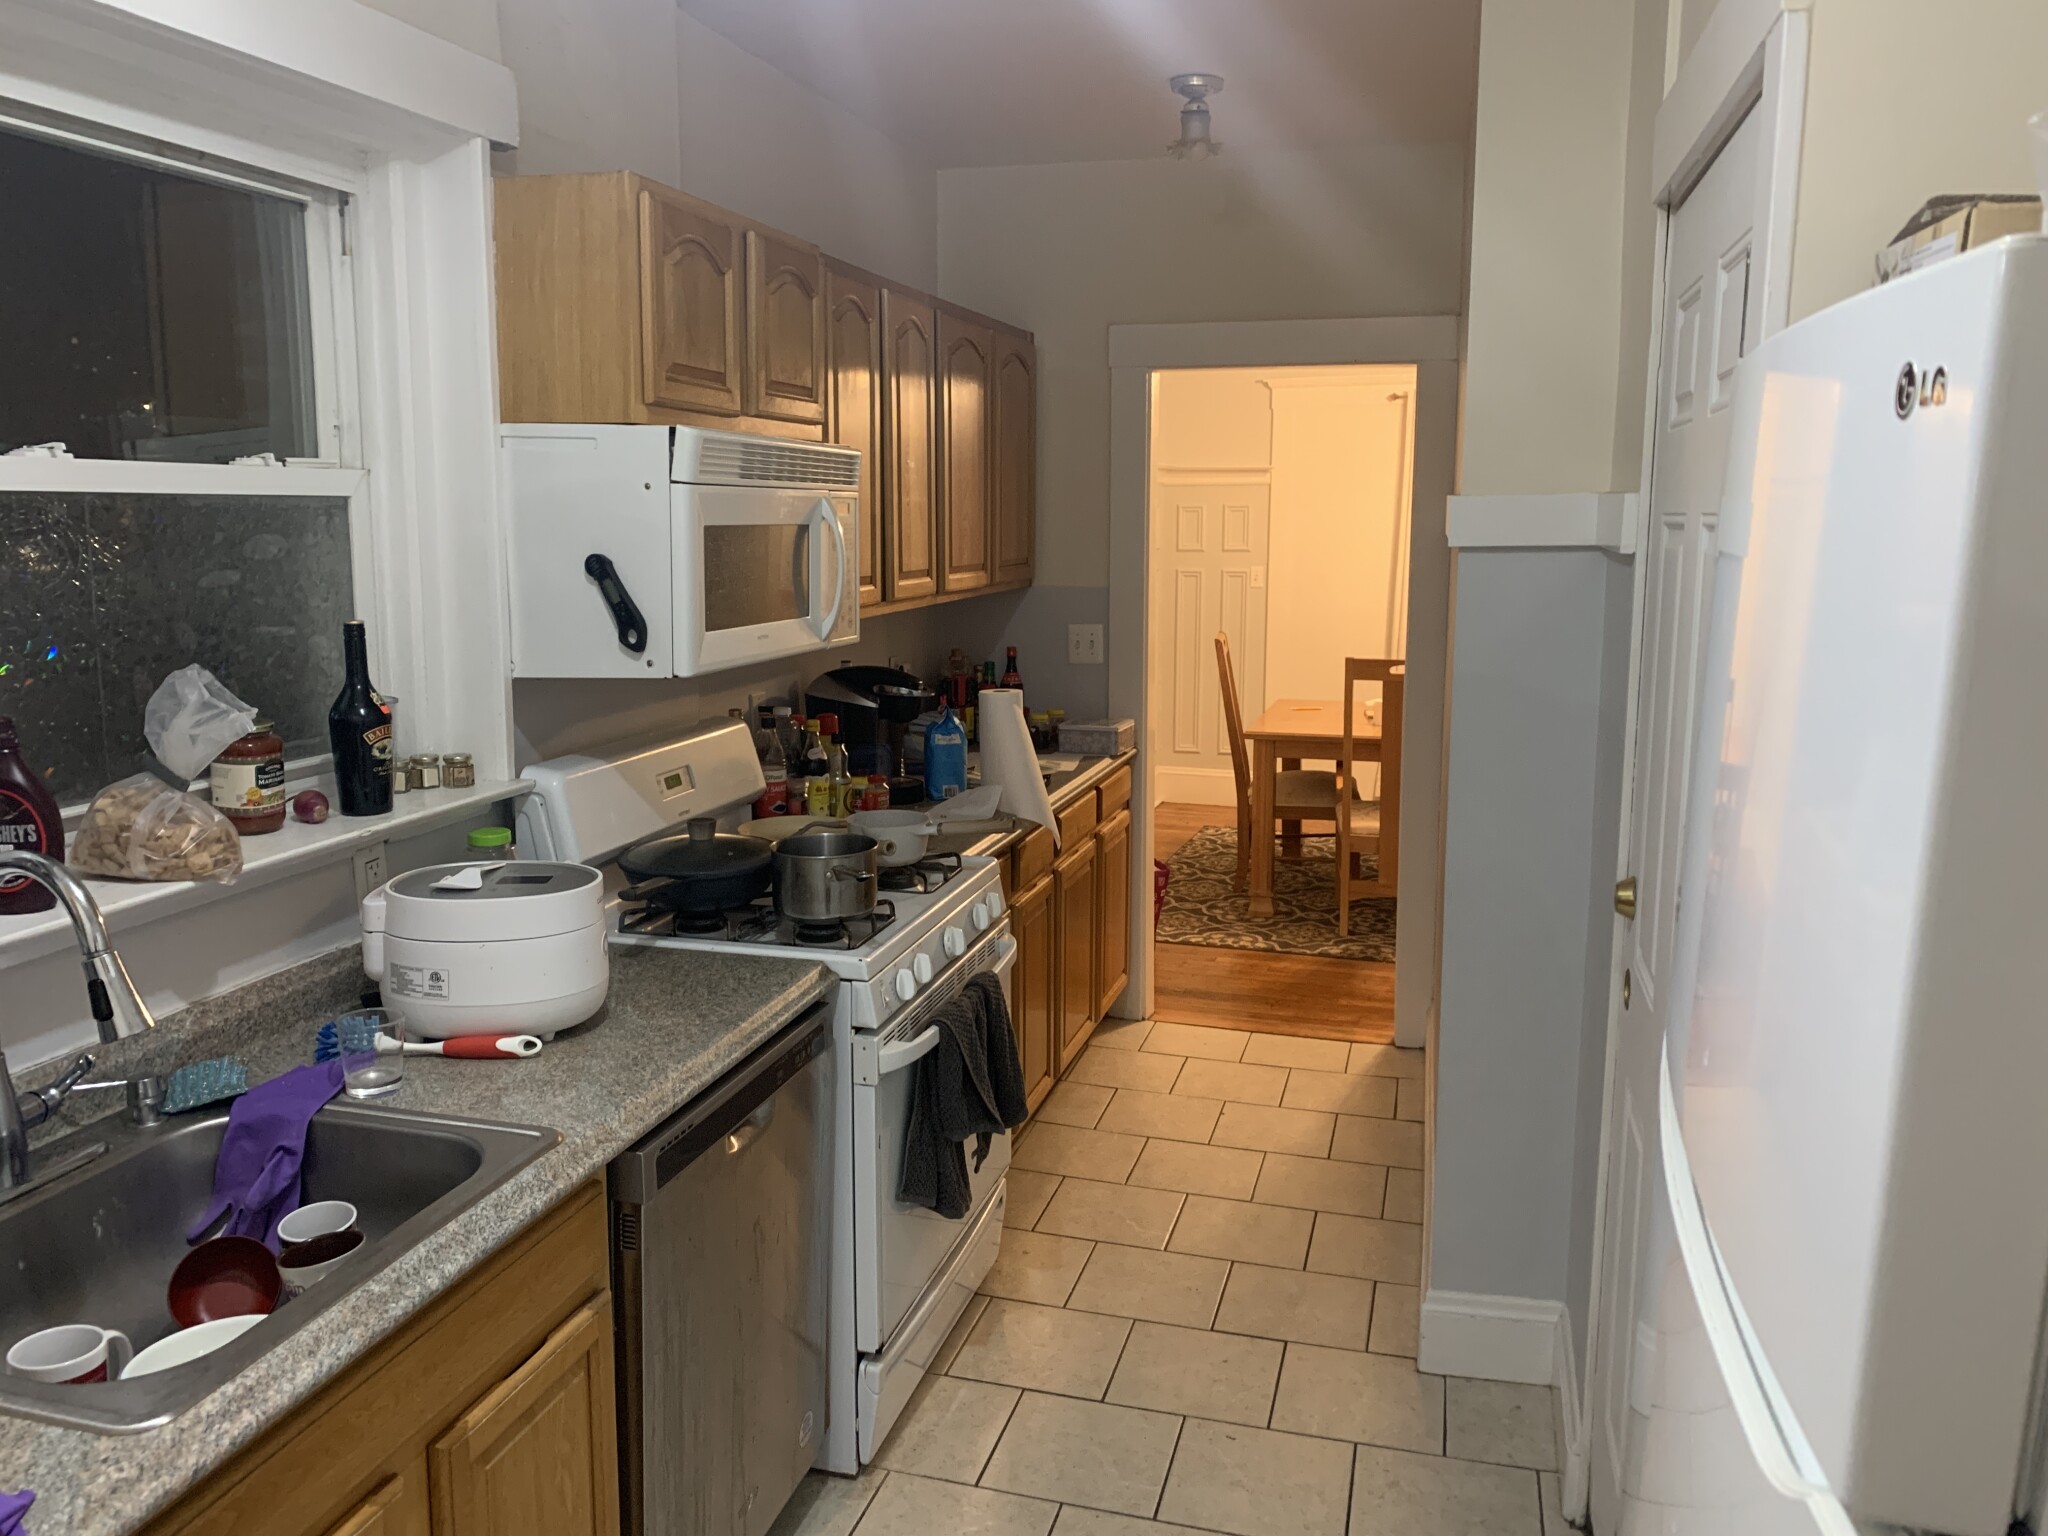 Photos of apartment on Shannon St.,Boston MA 02135